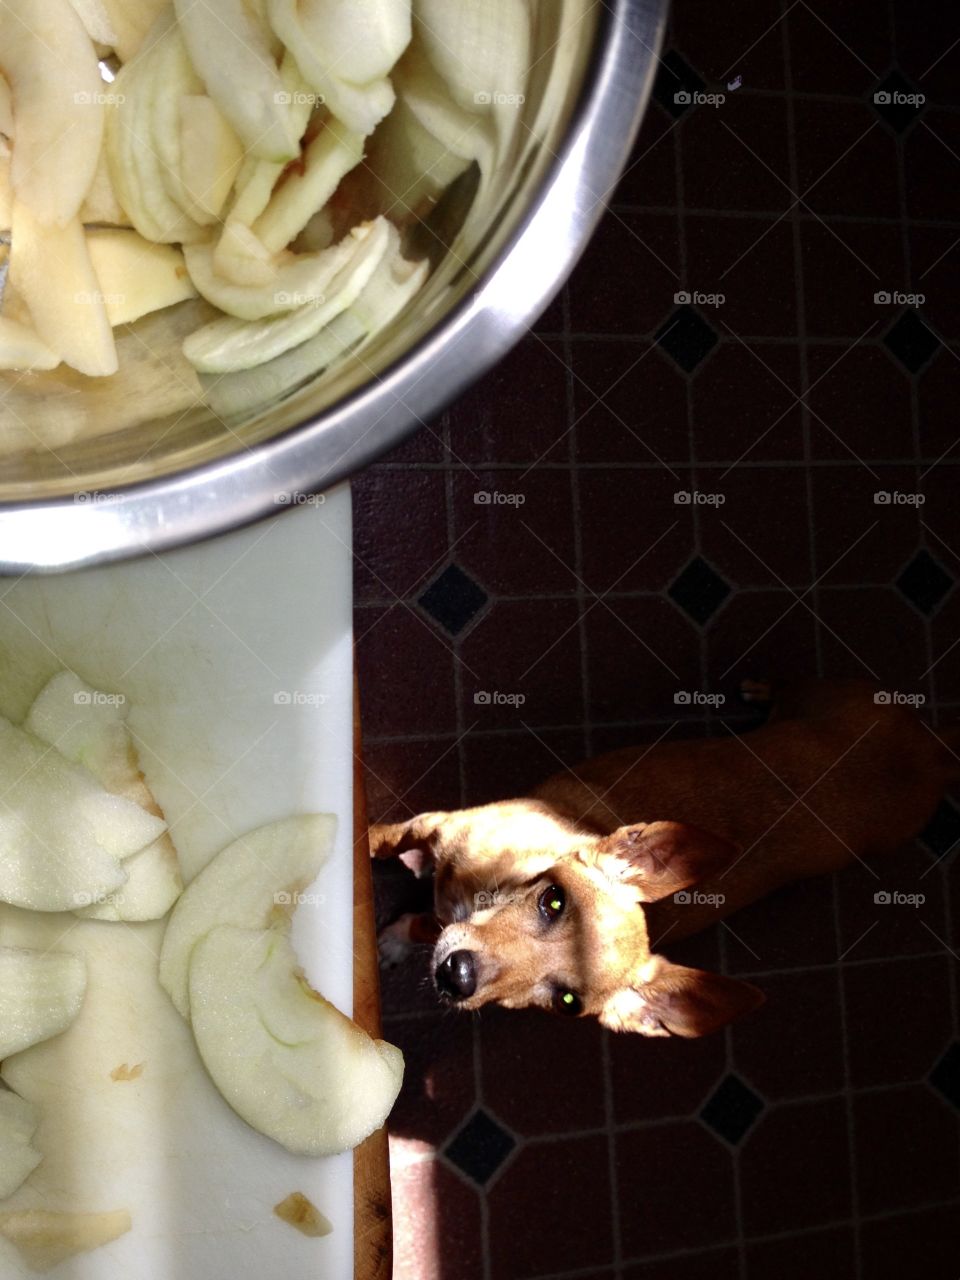 My dog Ginger loves apples, she's hoping a piece falls. One will!